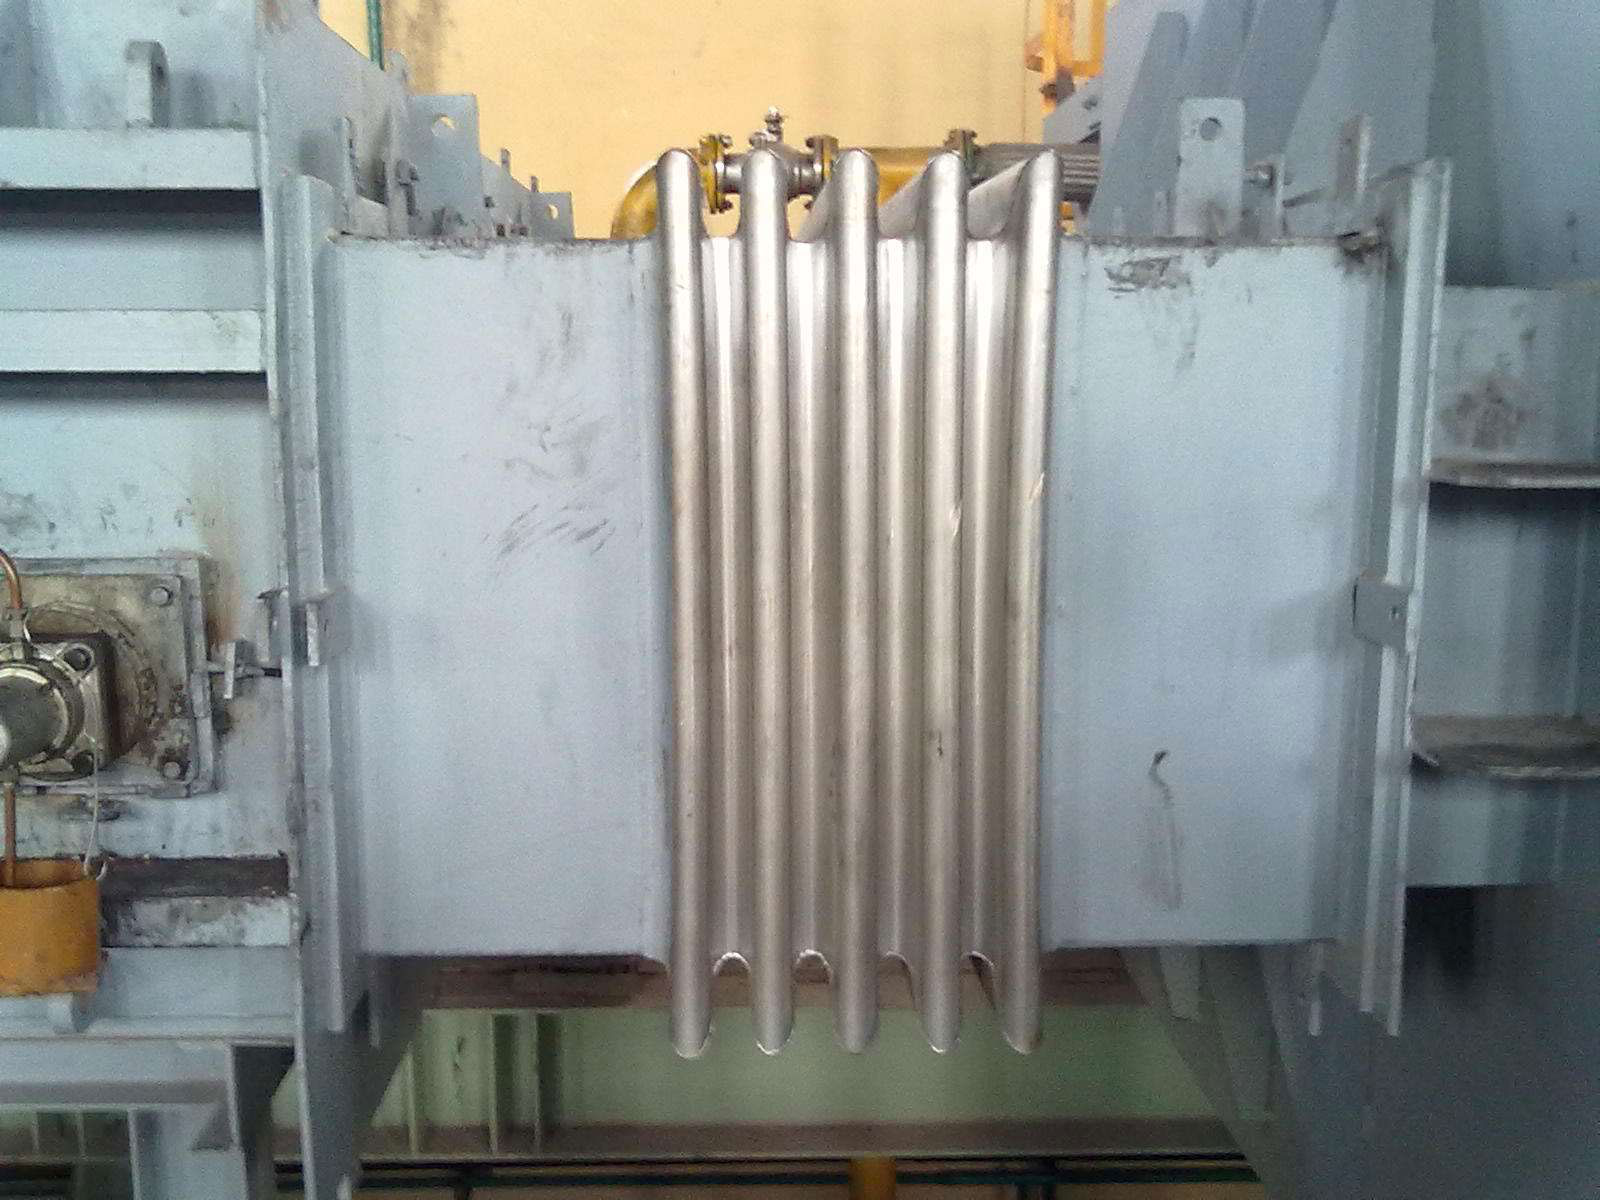 Rectangular metal corrugated expansion joint for shock absorption of fan inlet and outlet